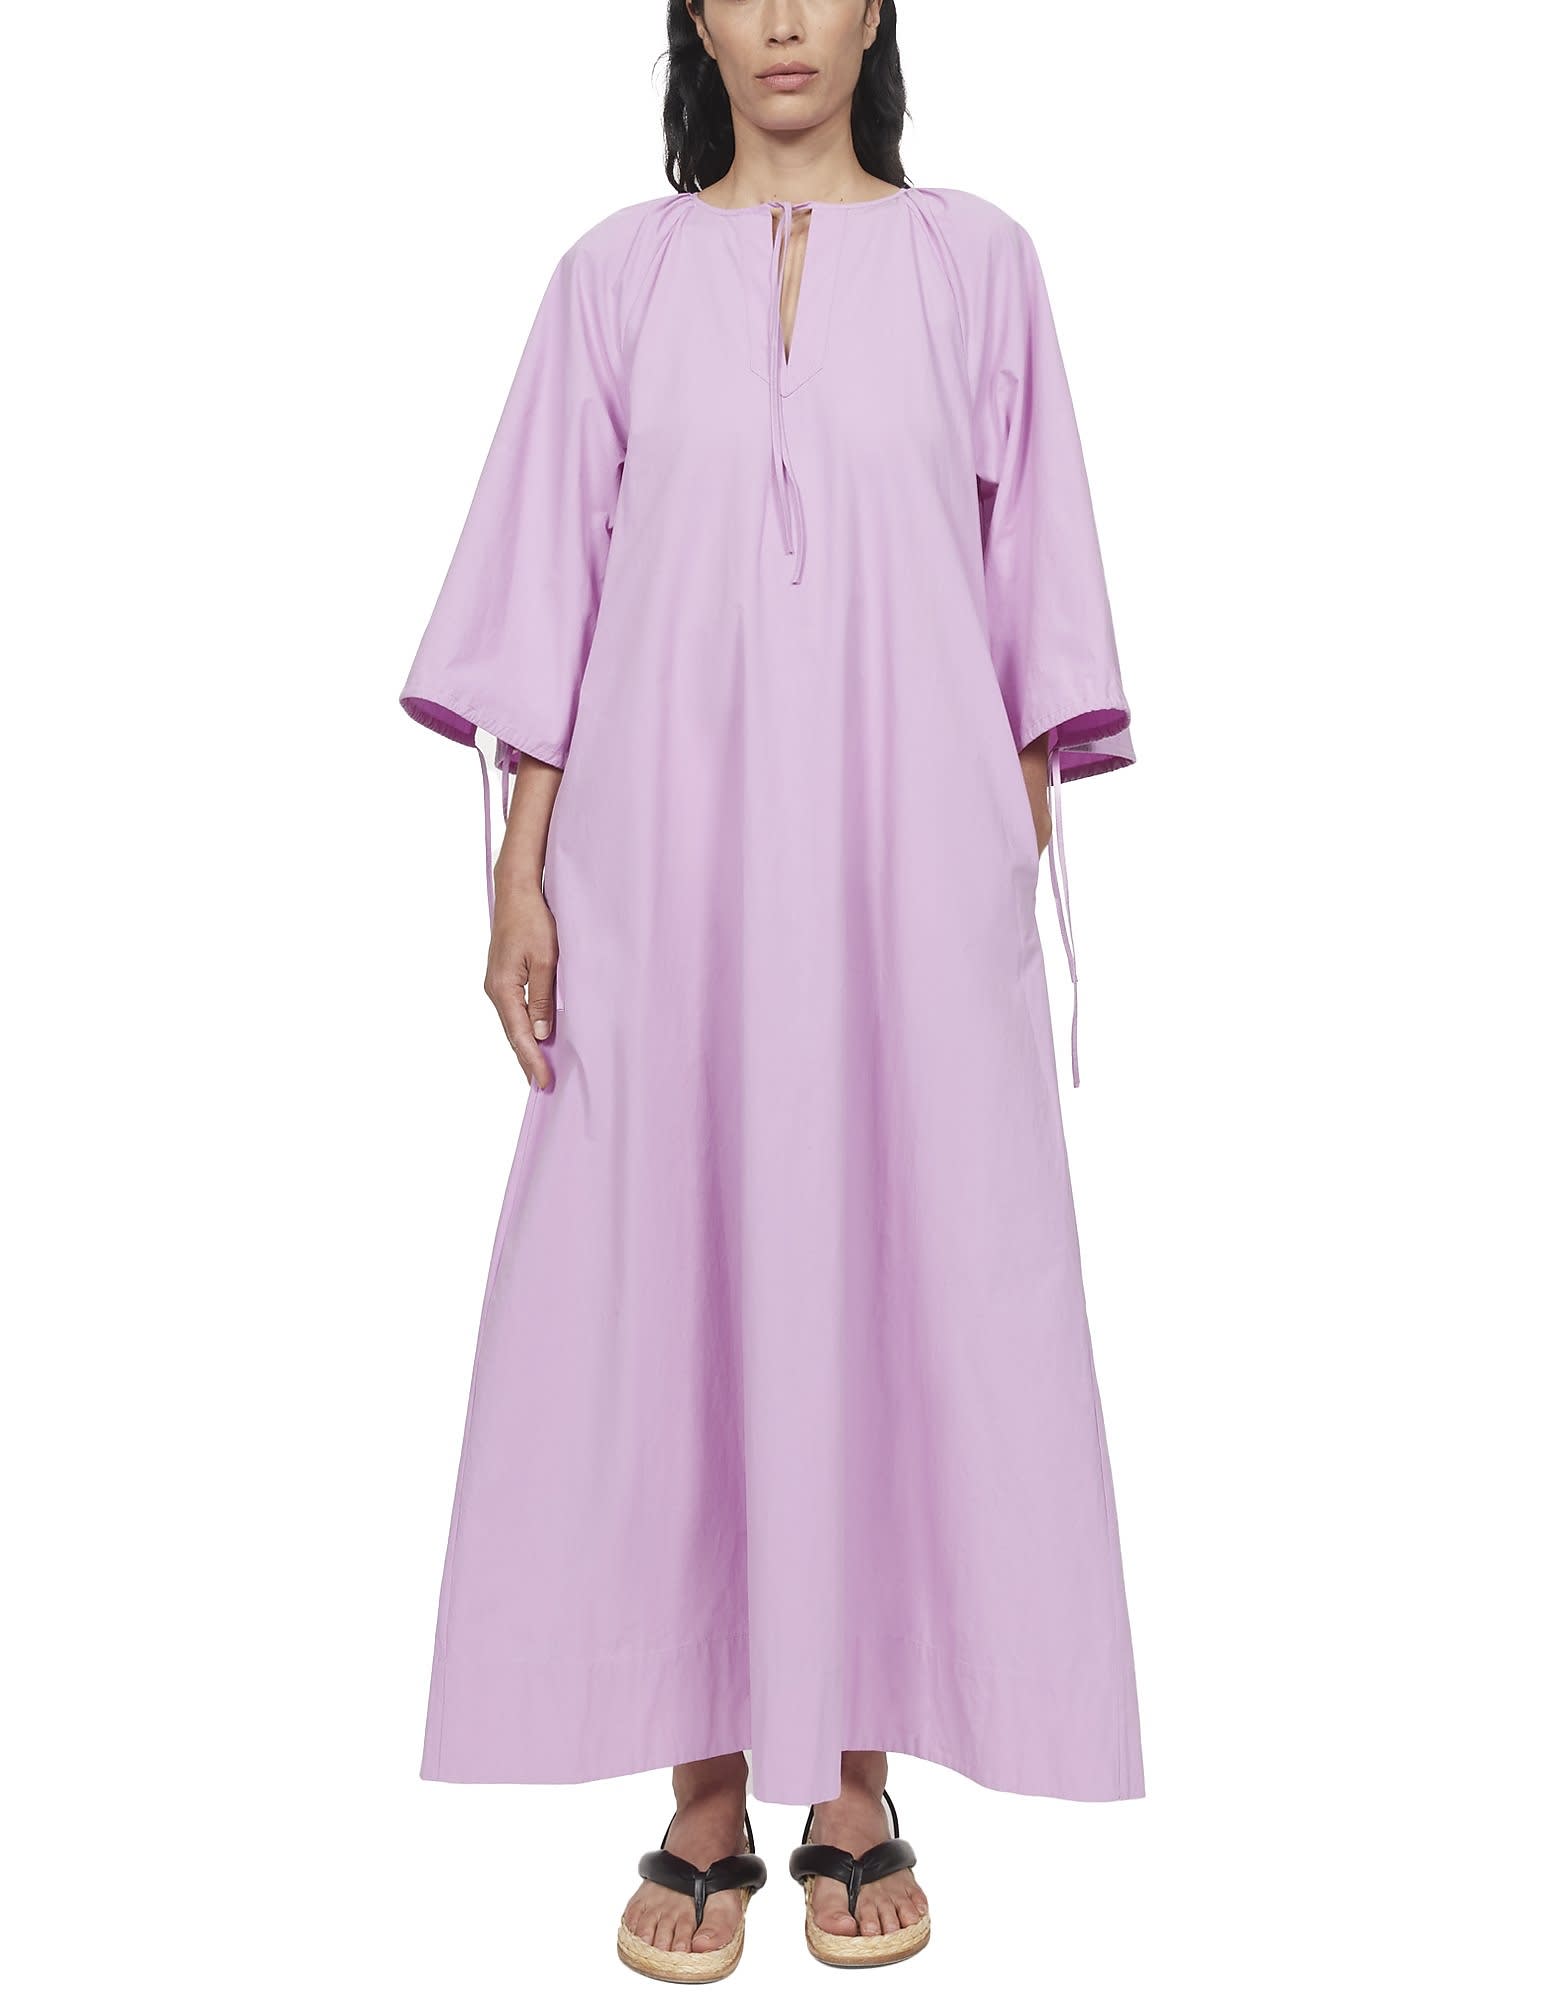 Rodebjer Galaxy Pulp Lavender Cotton Dress